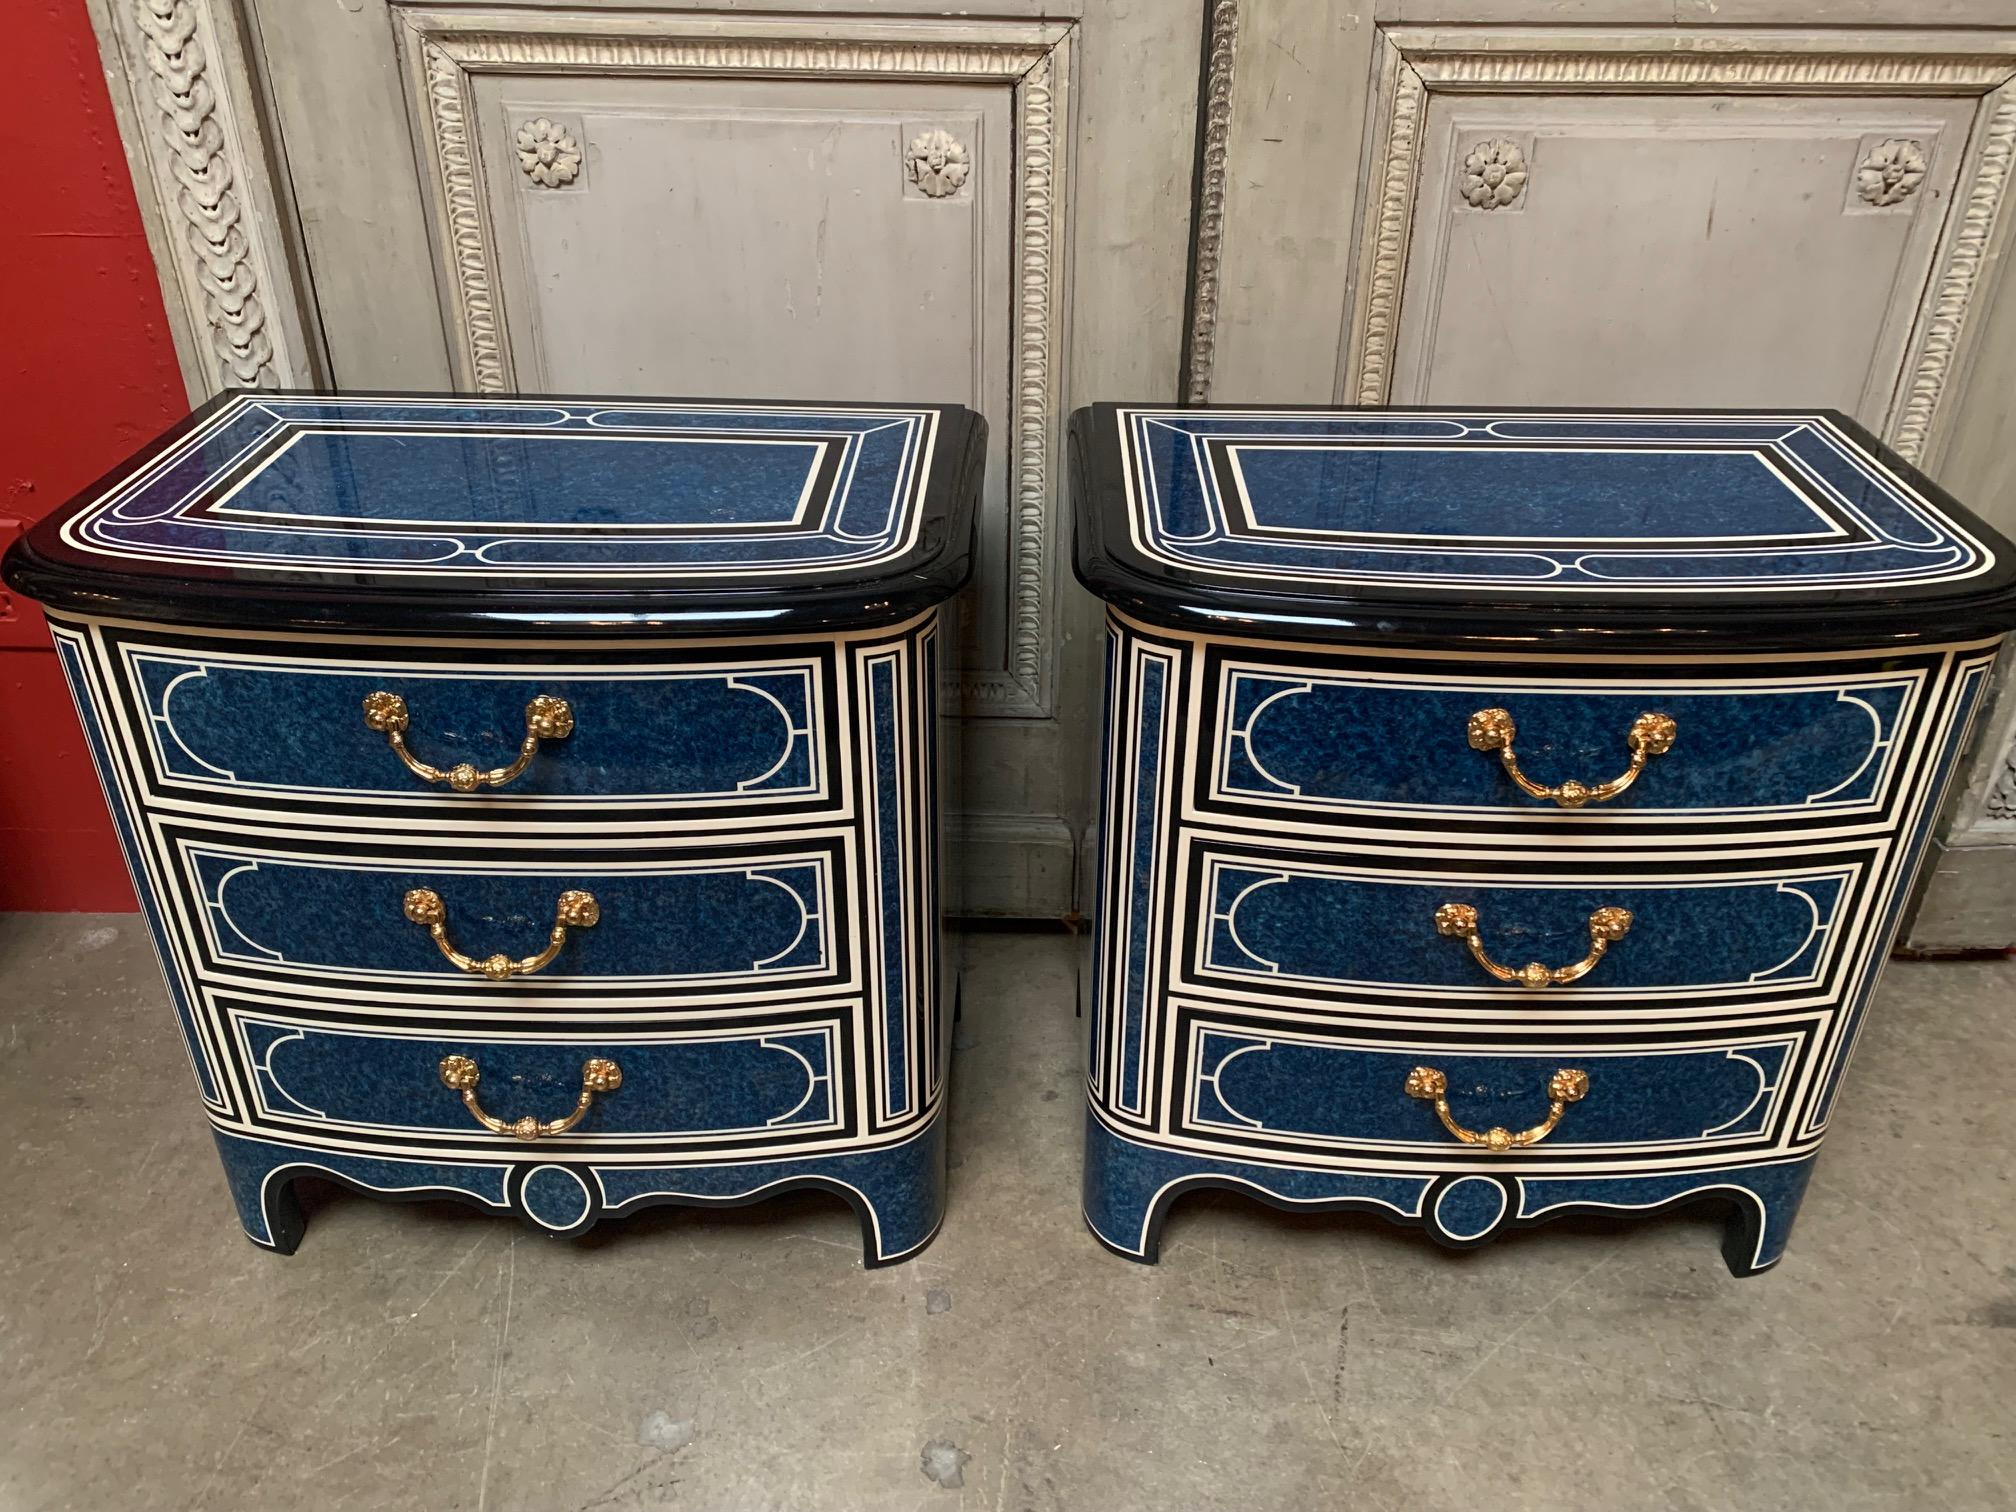 Lacquered Pair of French Regence Style Commodes with a Blue and White Laquered Finsish